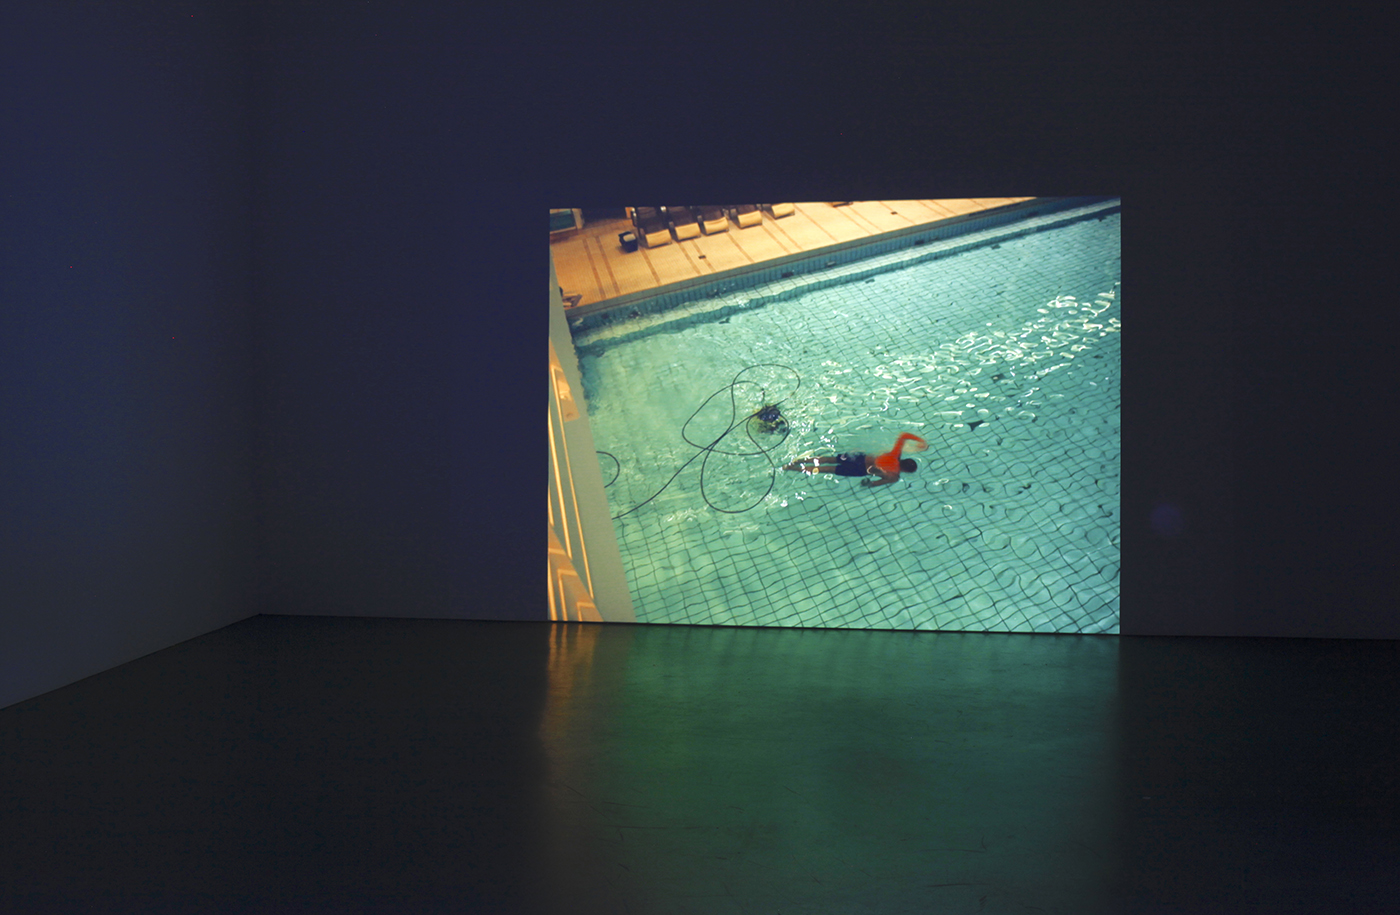 Installation view of Cleaner in 2015 by Jane Garbert